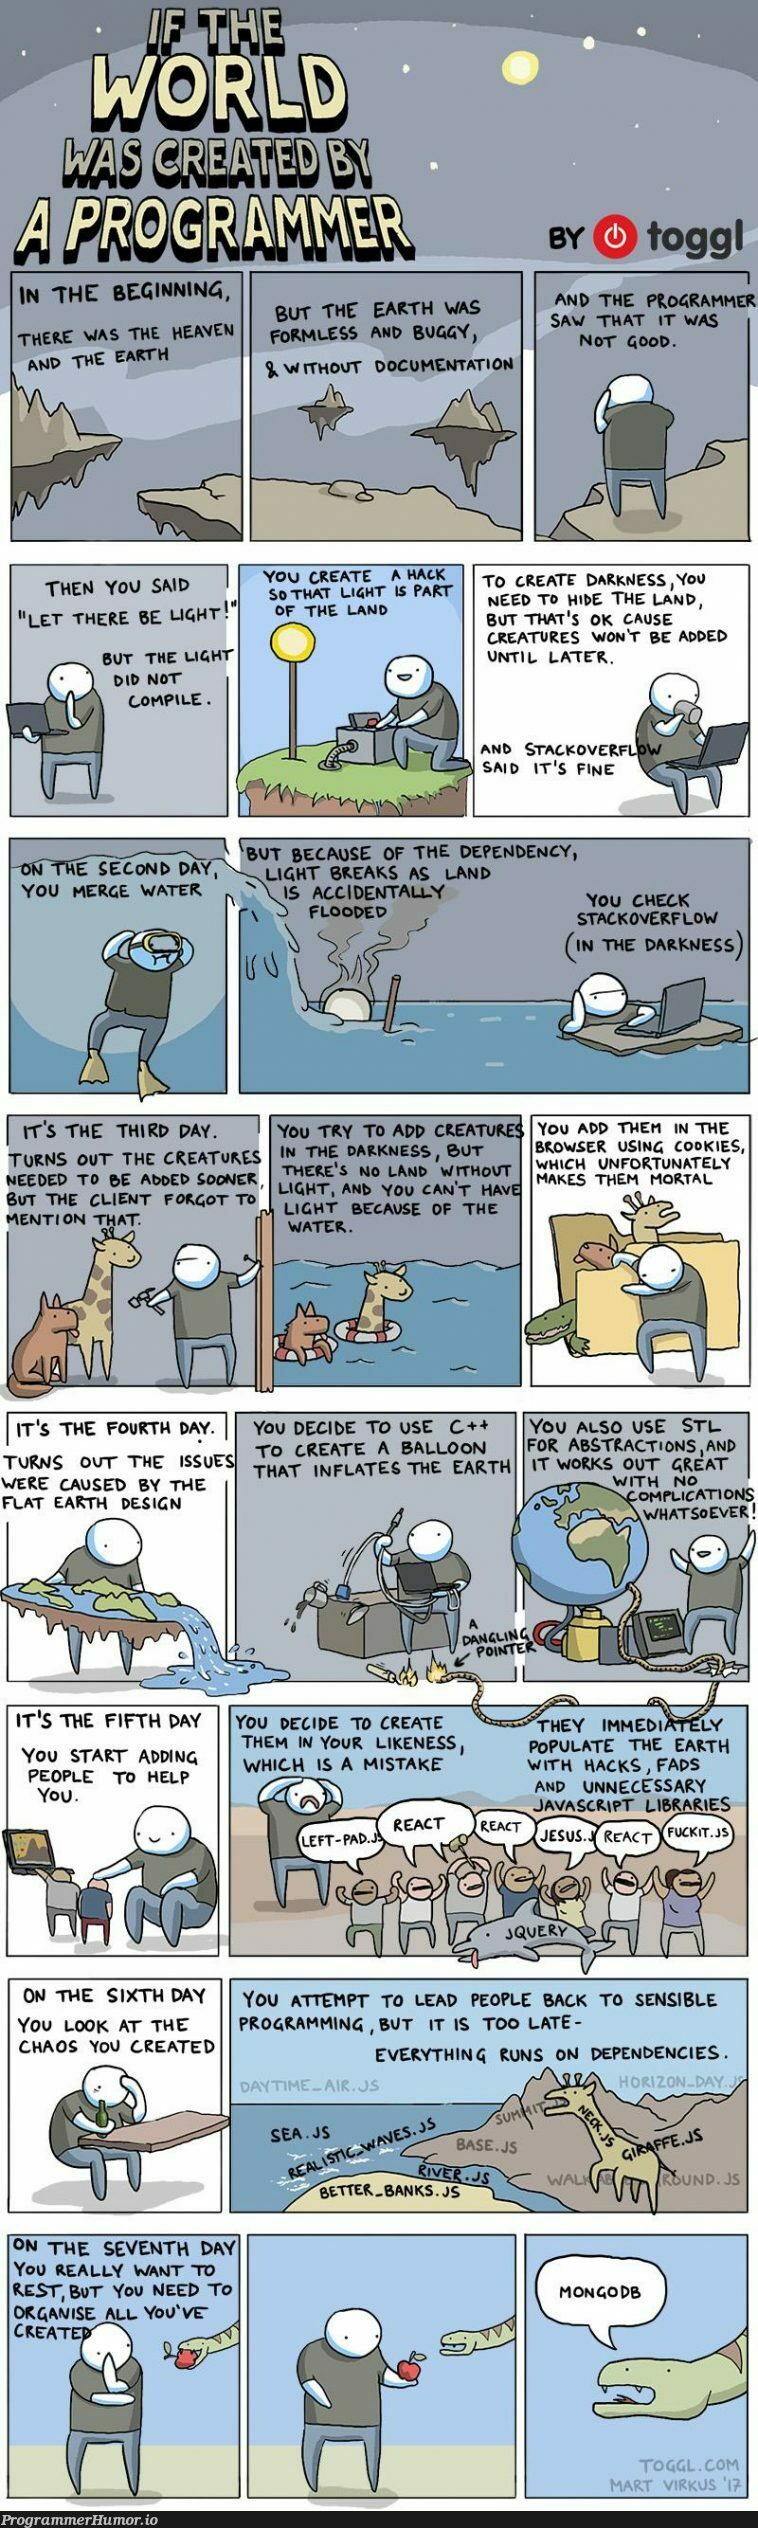 If the world was created by a programmer | programming-memes, programmer-memes, javascript-memes, java-memes, design-memes, stackoverflow-memes, stack-memes, program-memes, try-memes, c++-memes, bug-memes, mongodb-memes, rest-memes, xaml-memes, cli-memes, mongo-memes, overflow-memes, IT-memes, ide-memes, ML-memes, documentation-memes, dependencies-memes, dependency-memes | ProgrammerHumor.io